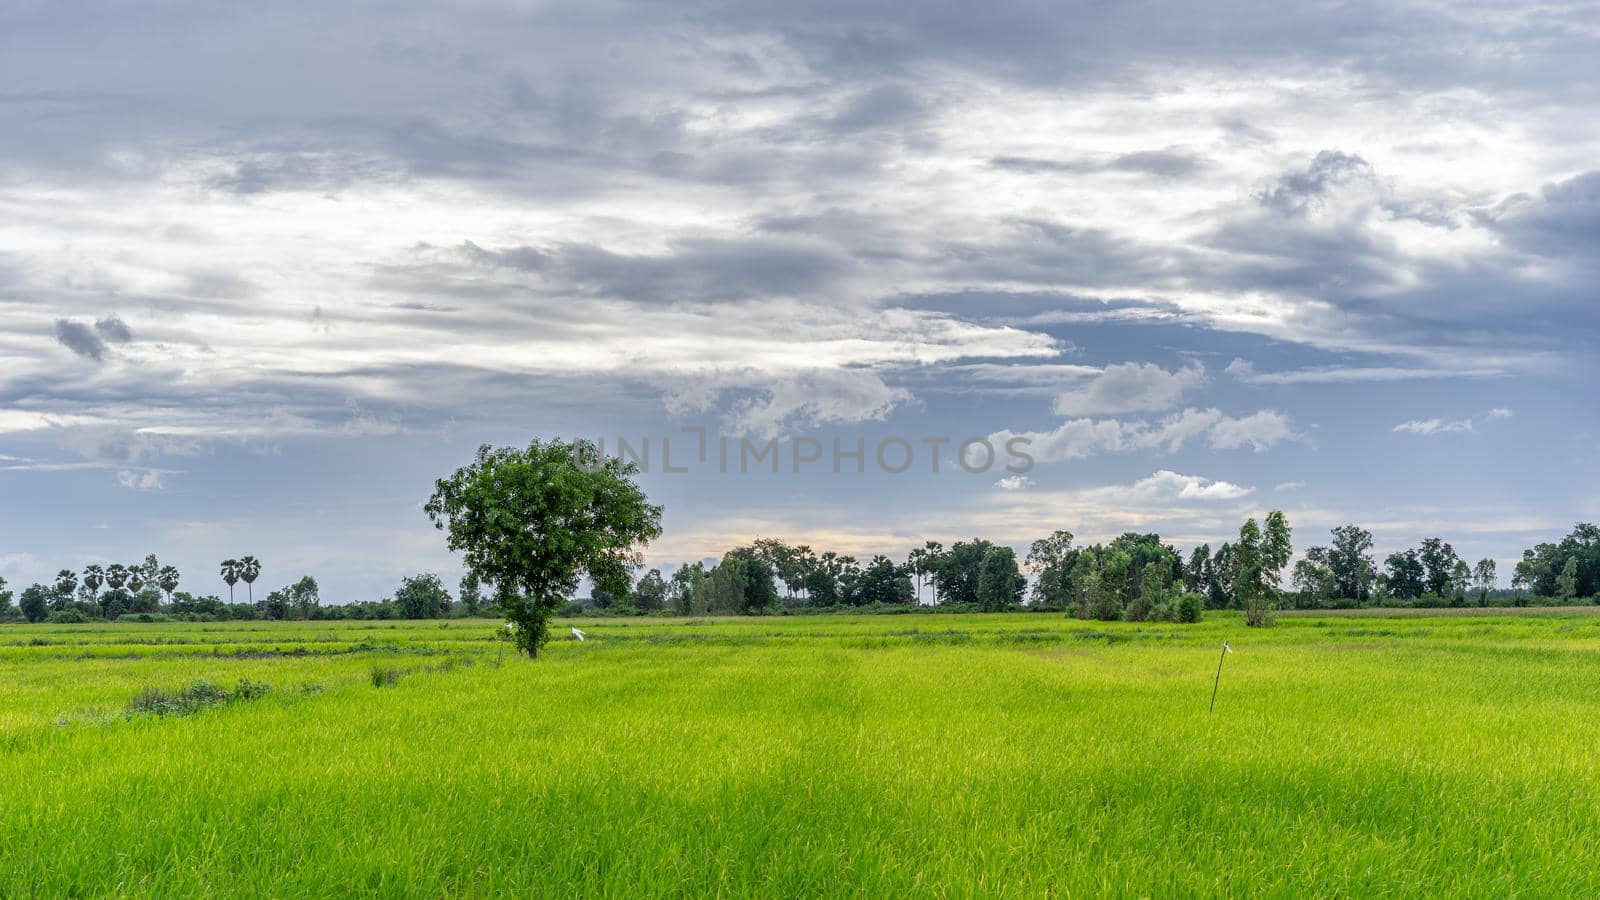 Tree in green field with rainclouds in countryside